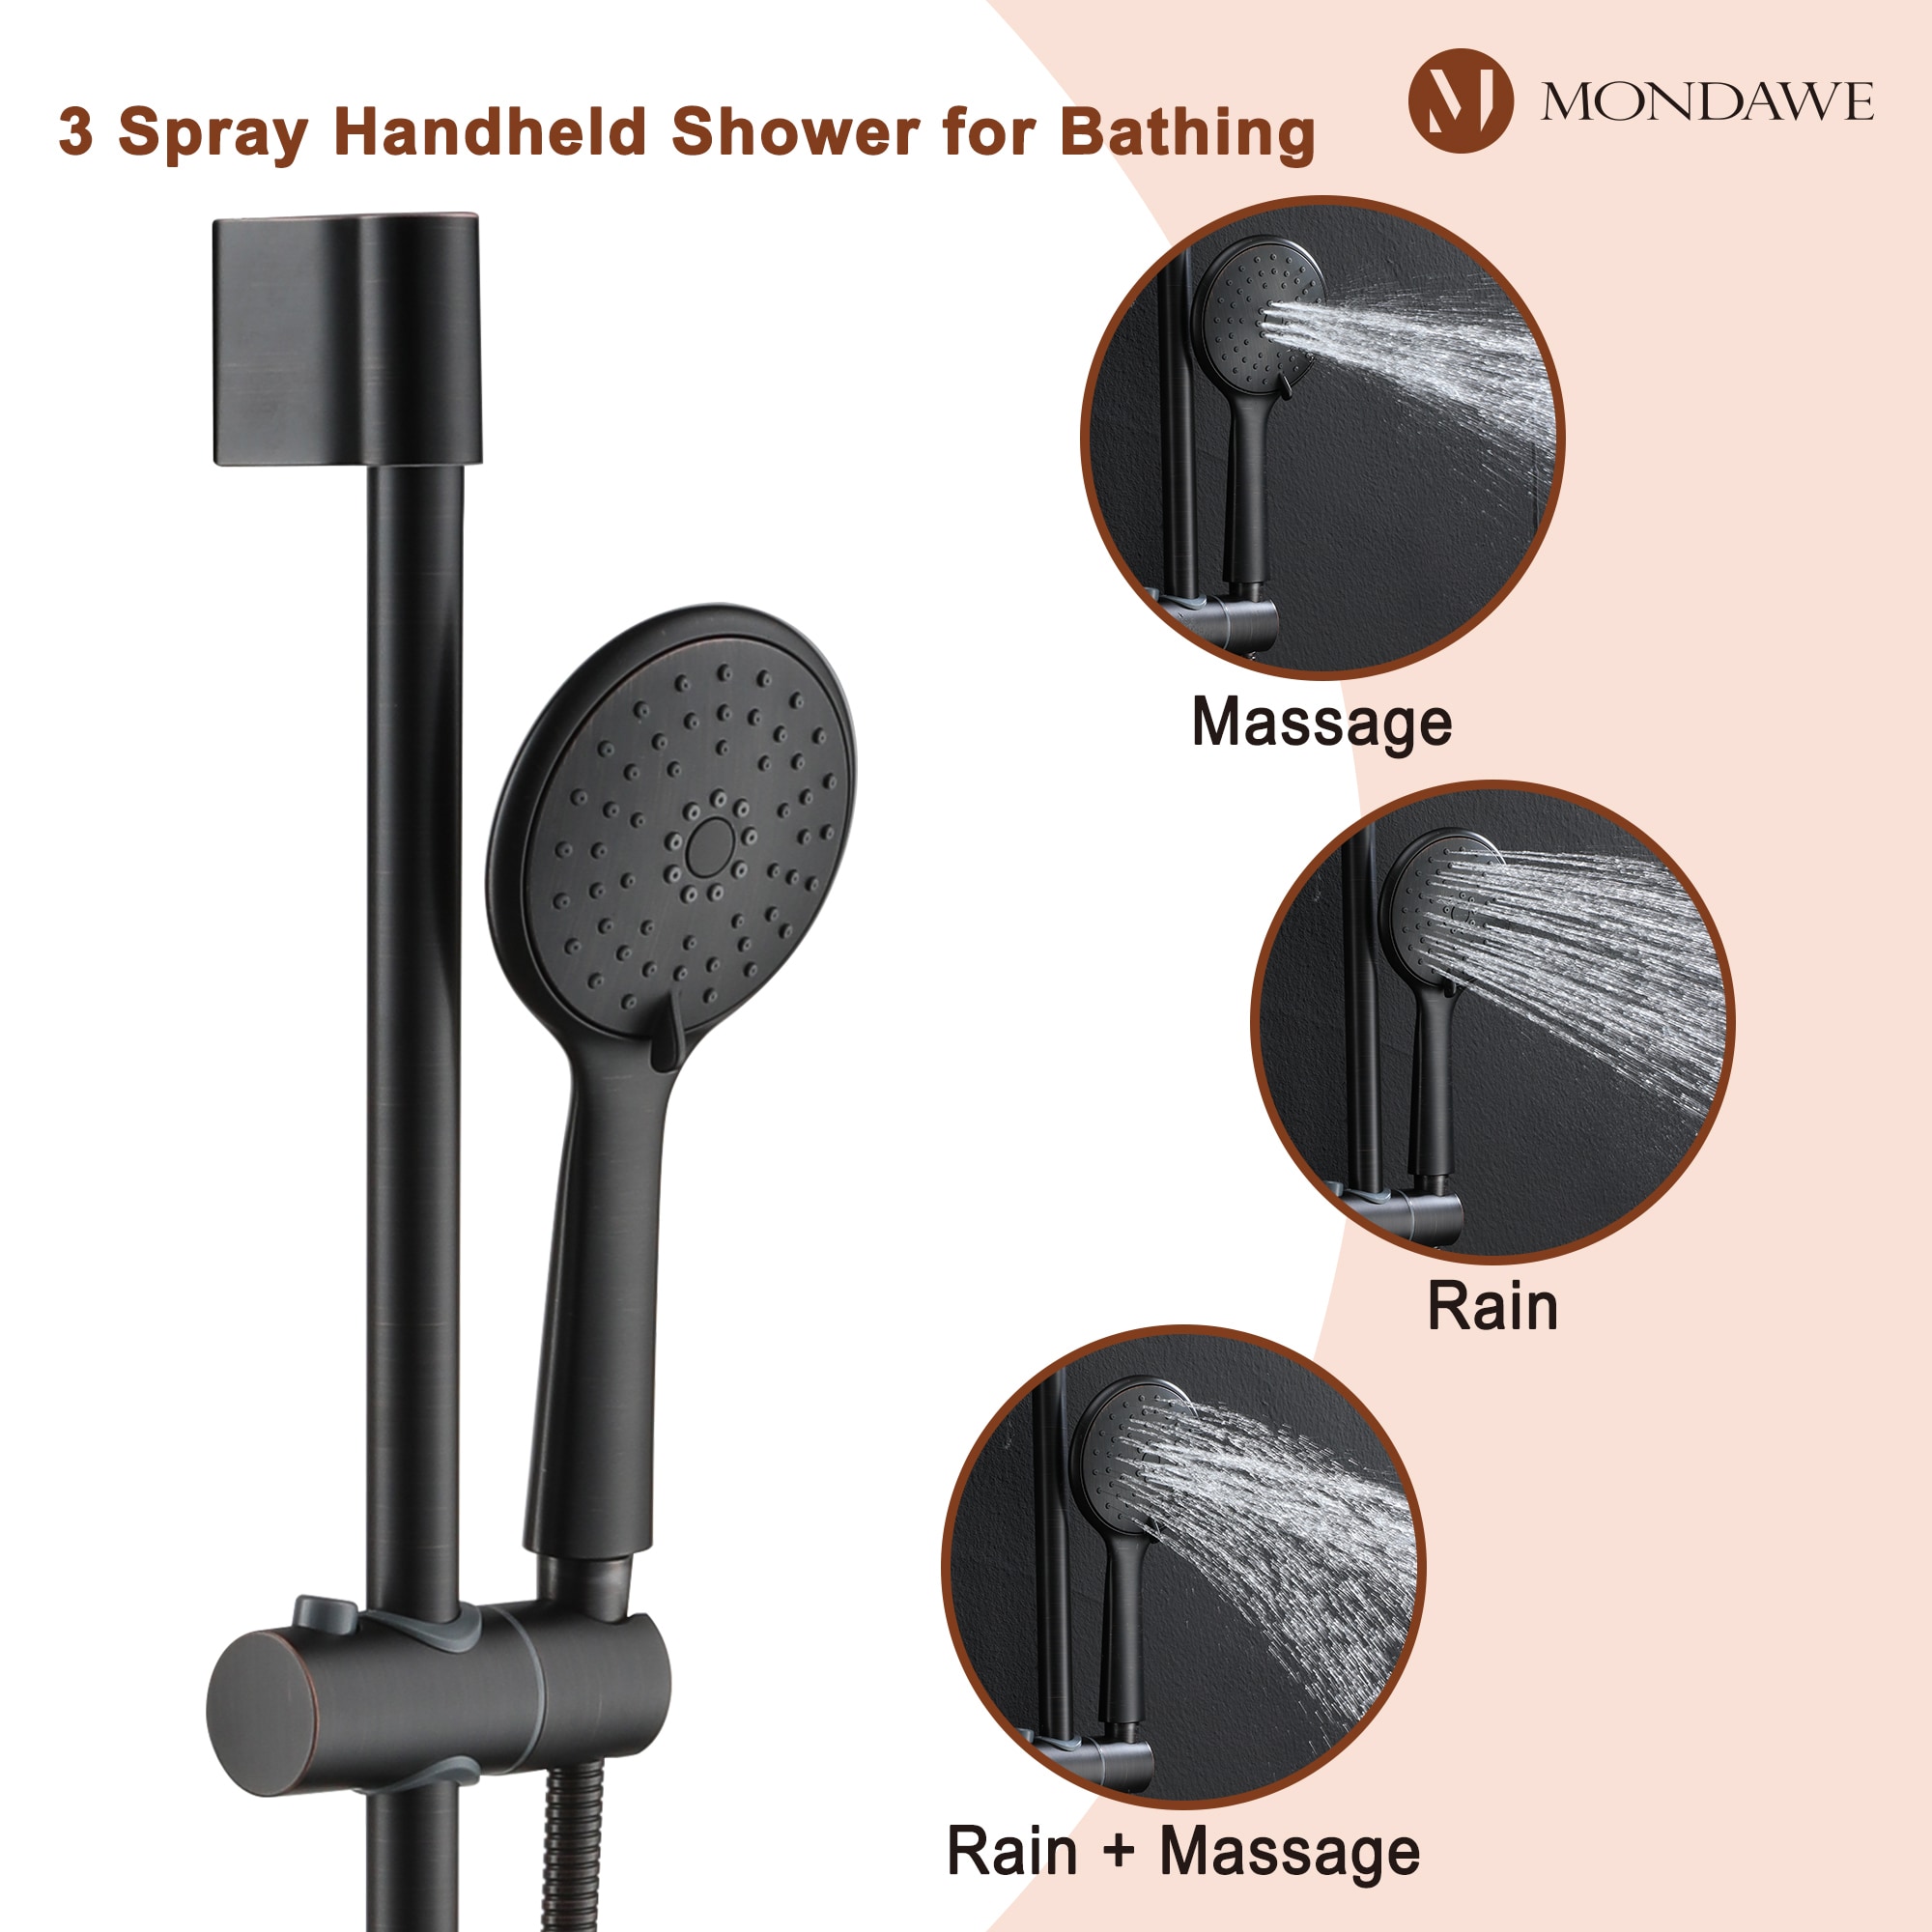 Mondawe Oil-Rubbed Bronze Built-In Shower Faucet System with 3-way